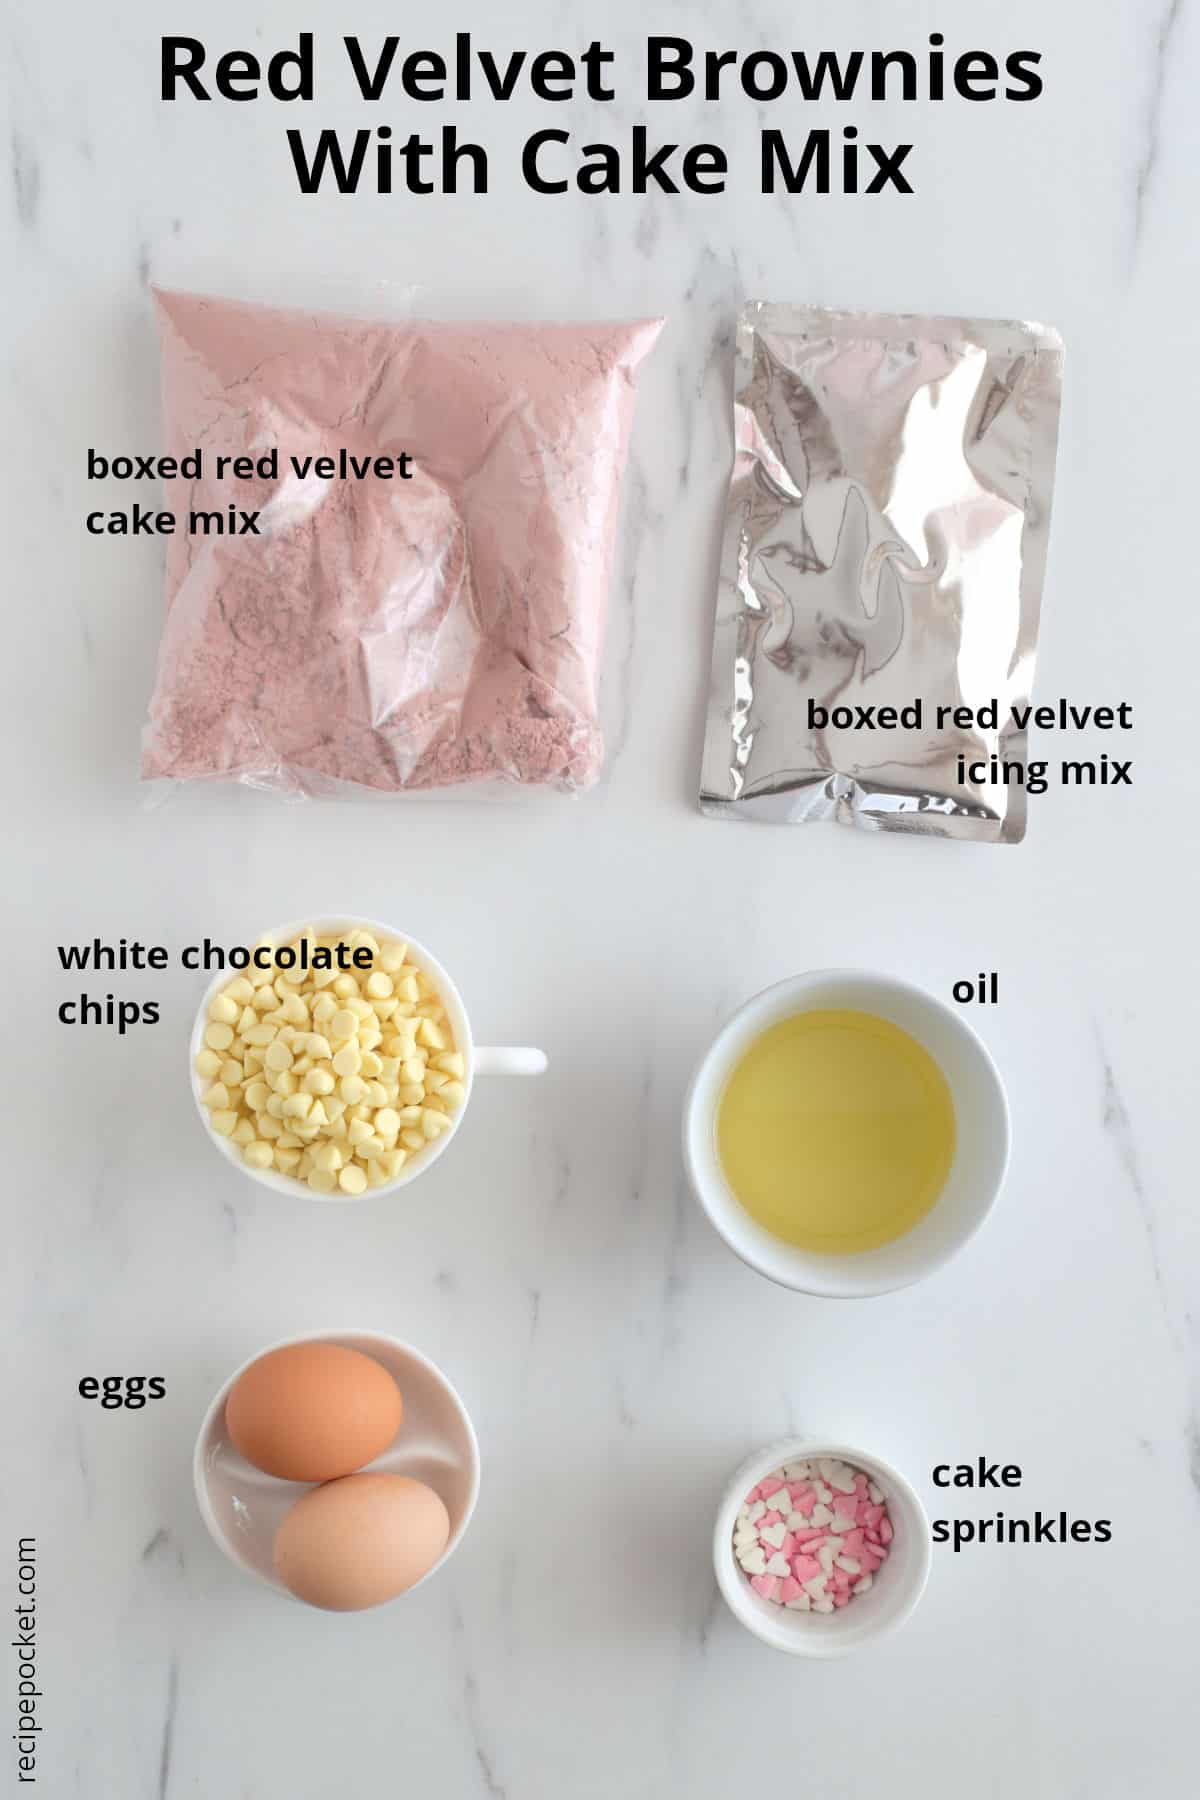 Image of ingredients needed to make red velvet brownies with cake mix.